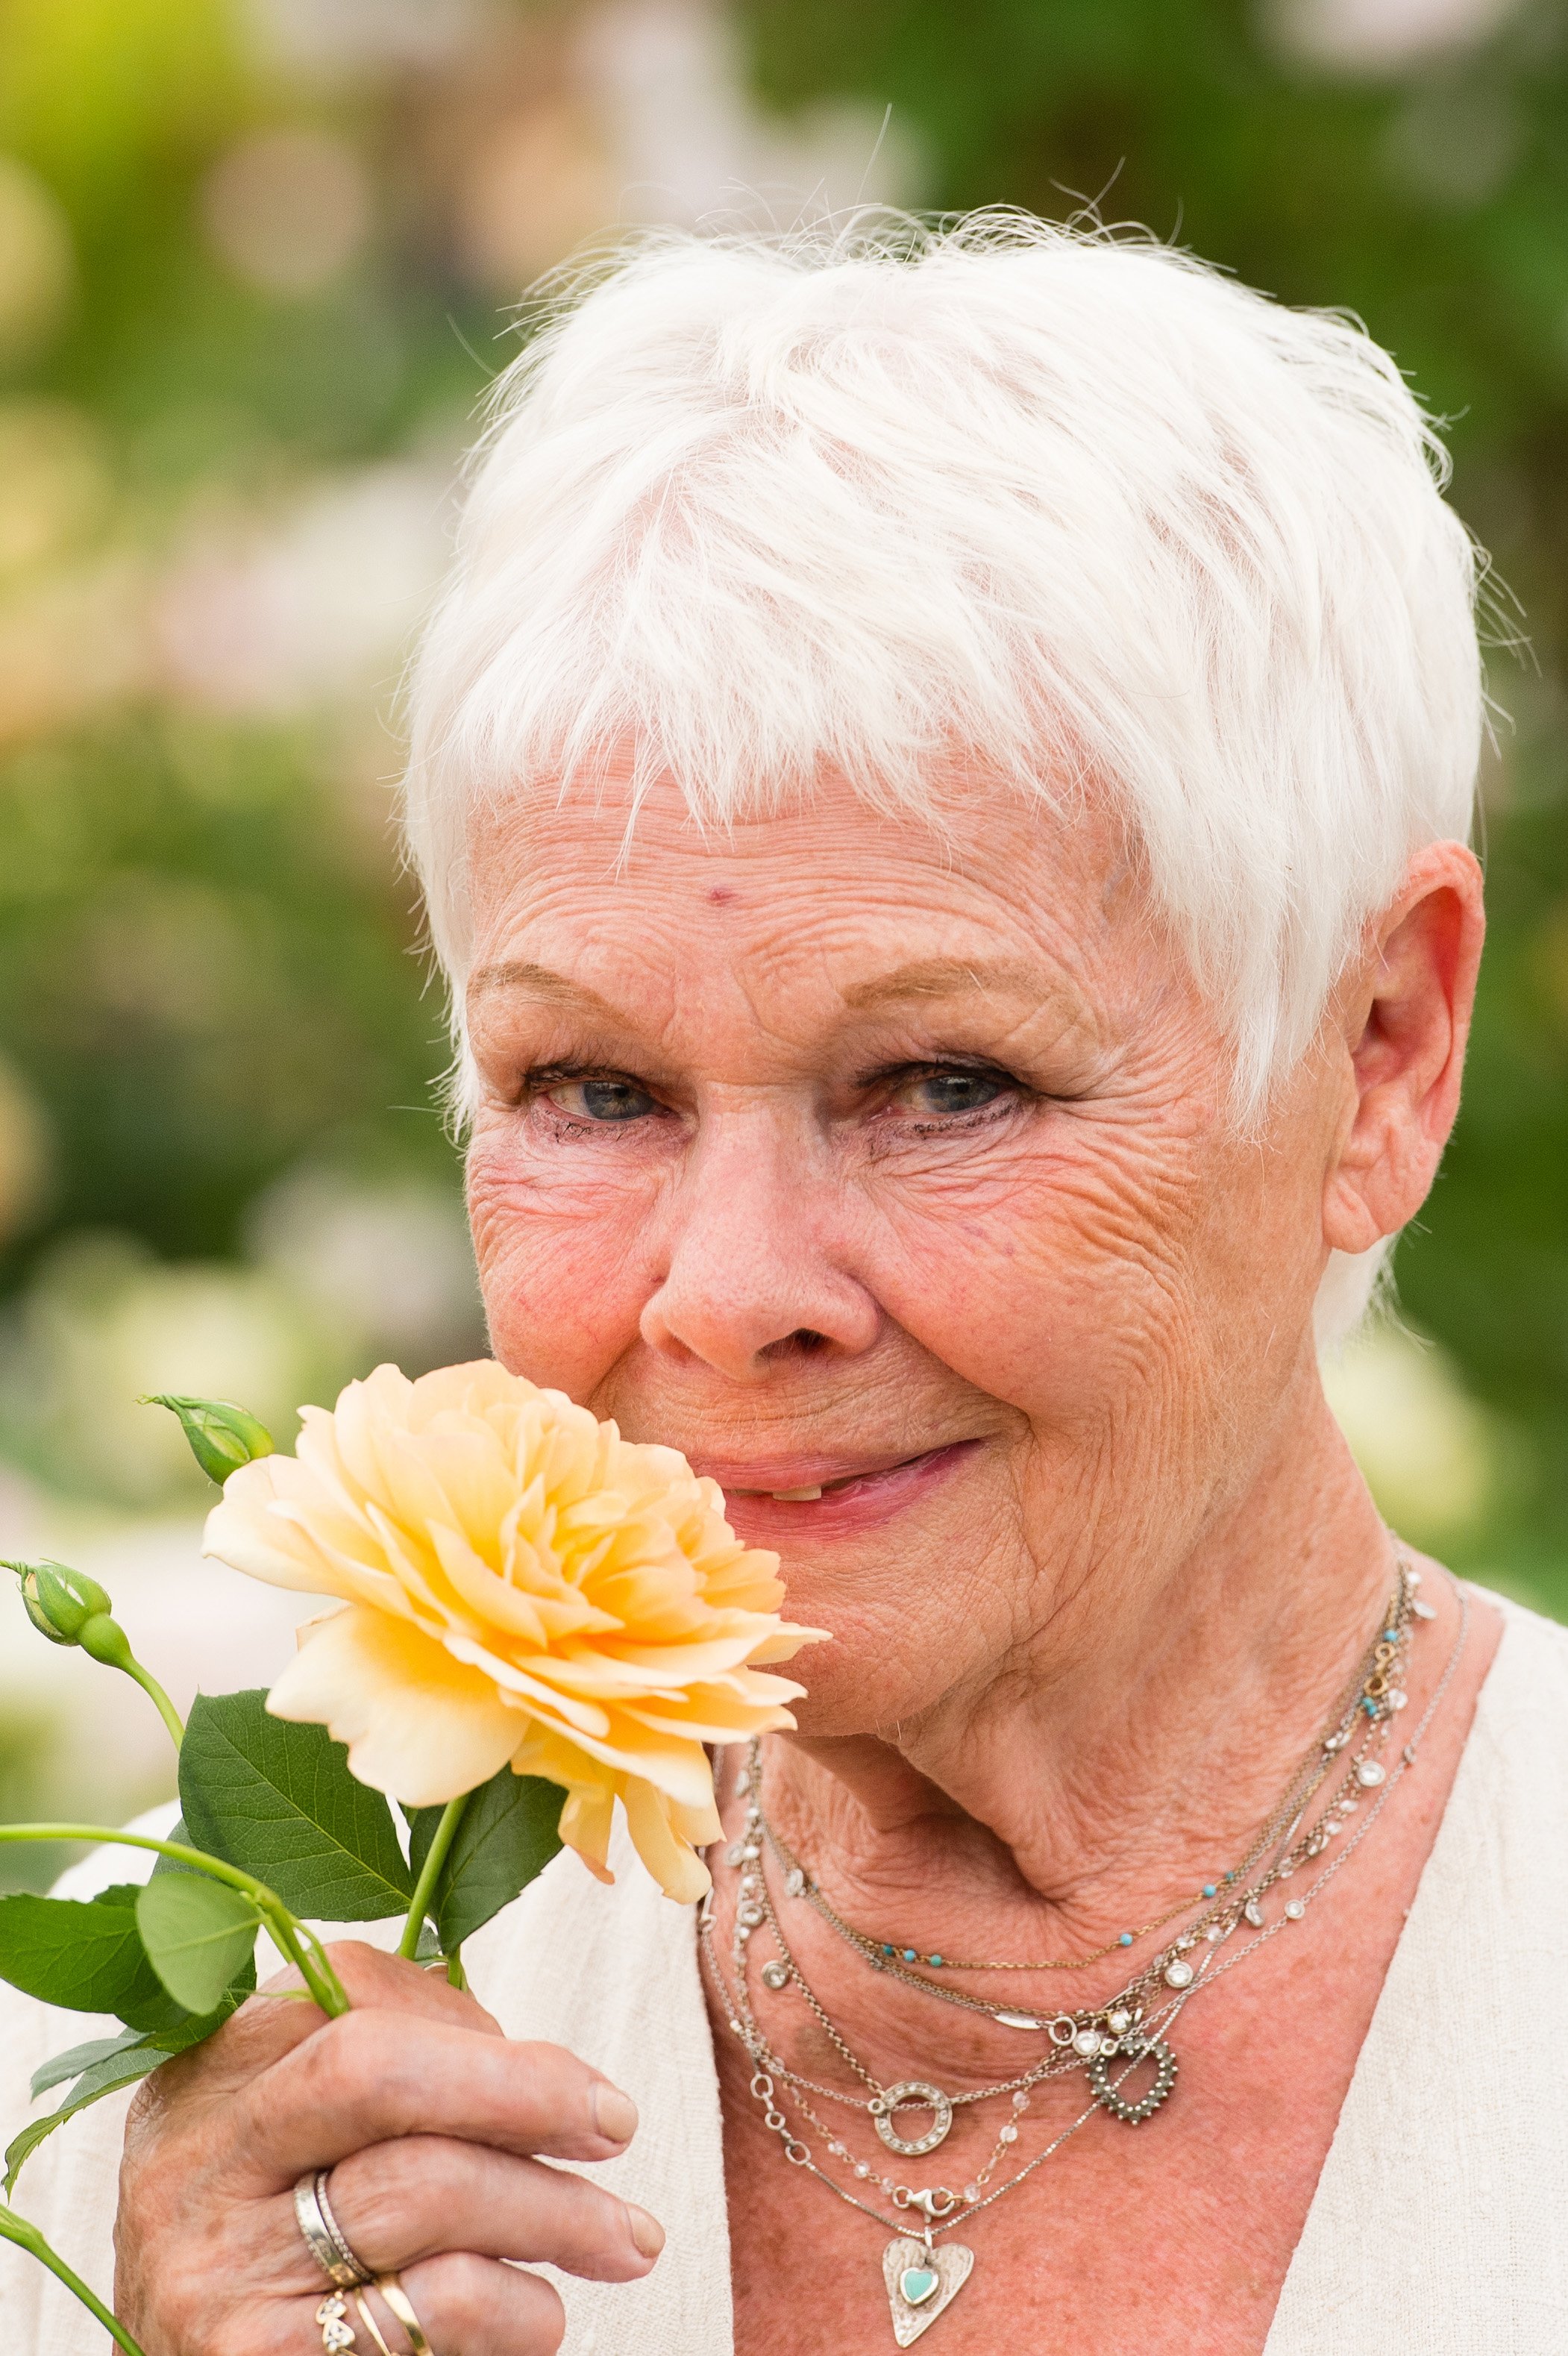 Judi Dench attends RHS Chelsea Flower Show press day at Royal Hospital Chelsea on May 22, 2017 in London, England | Source: Getty Images